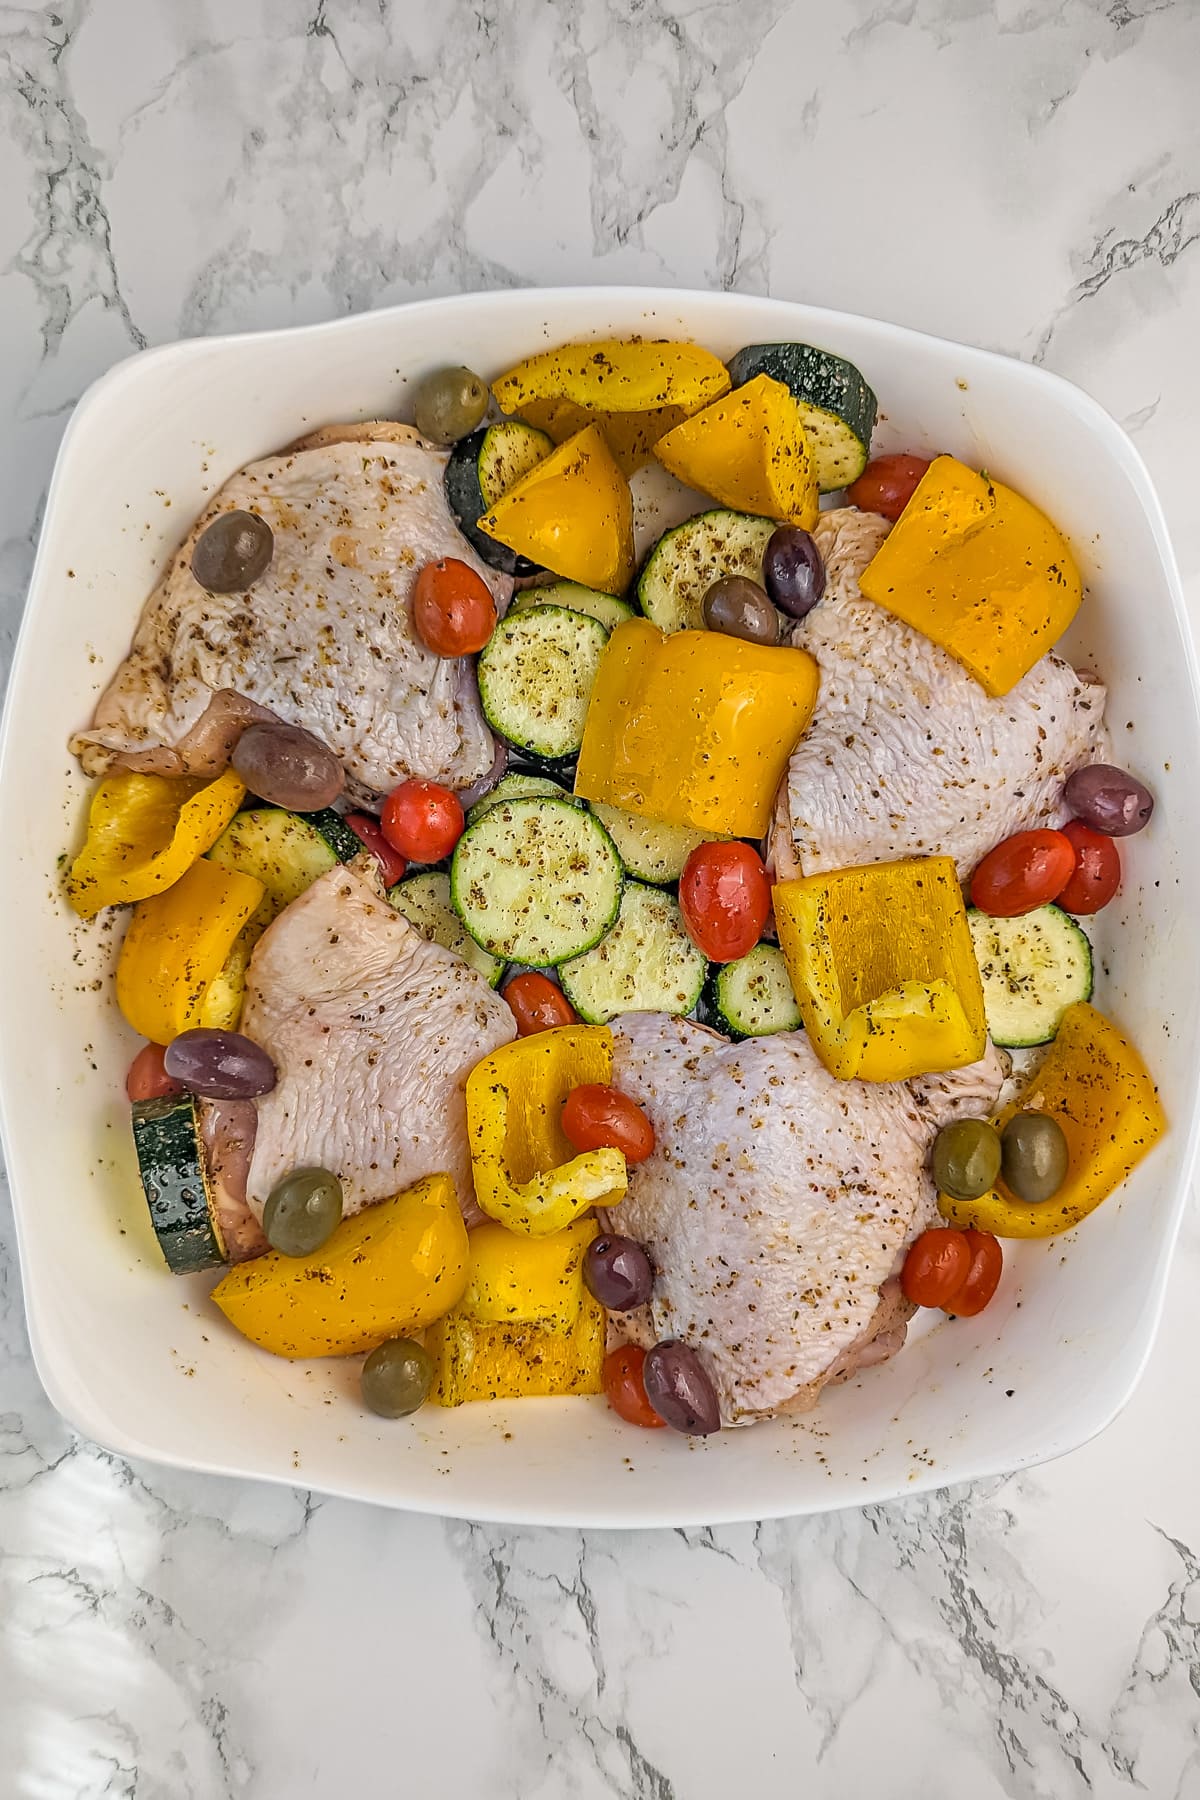 Uncooked Greek-style chicken thighs with vegetables and olives arranged in a white baking dish before cooking.